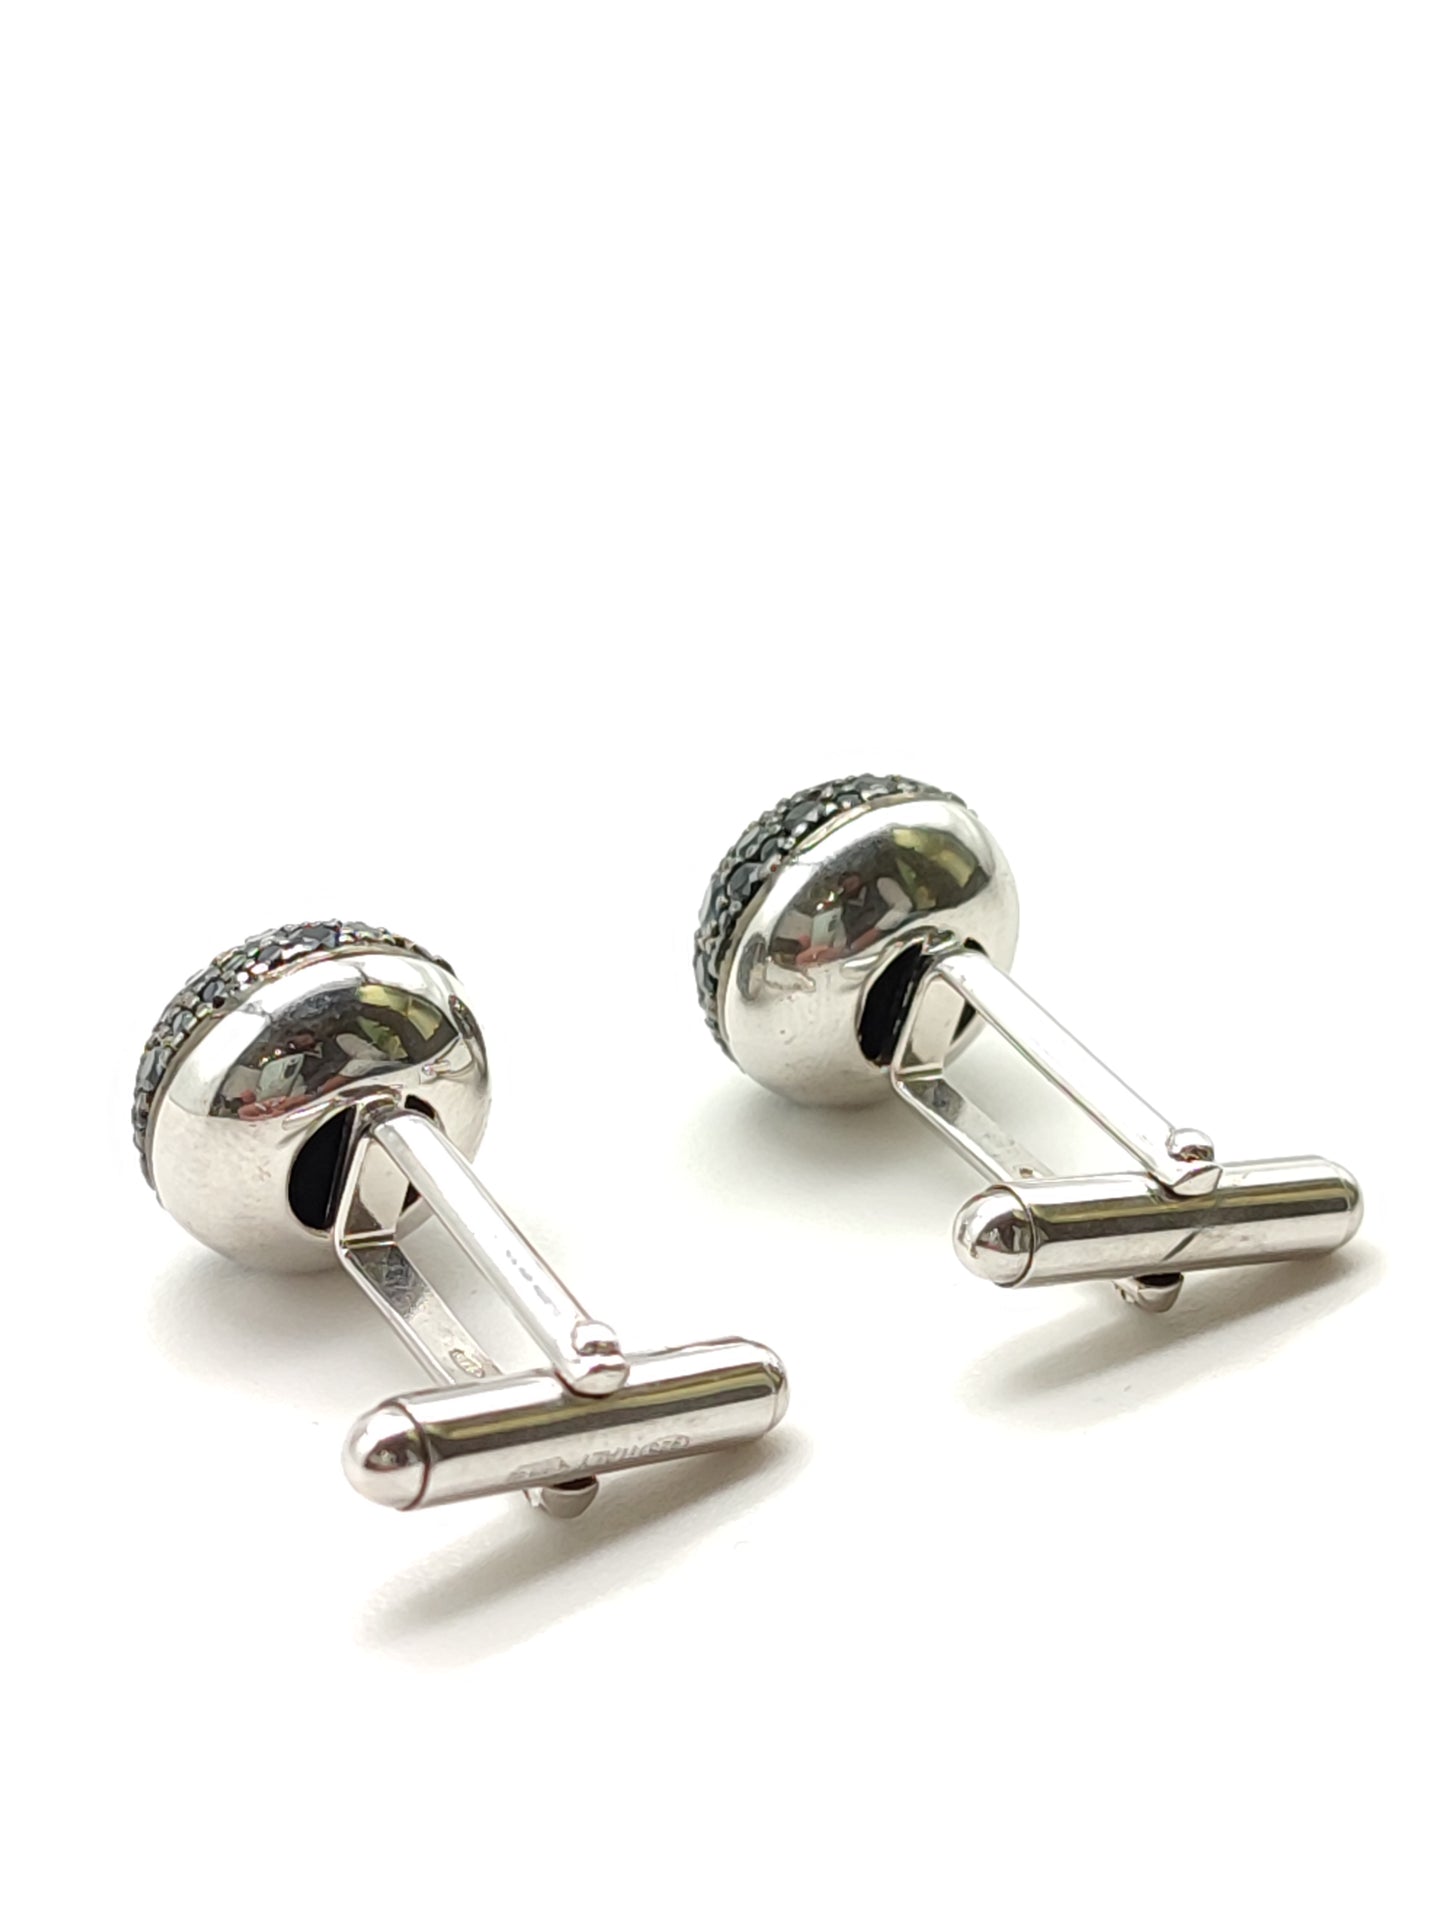 Silver cufflinks with black spinels